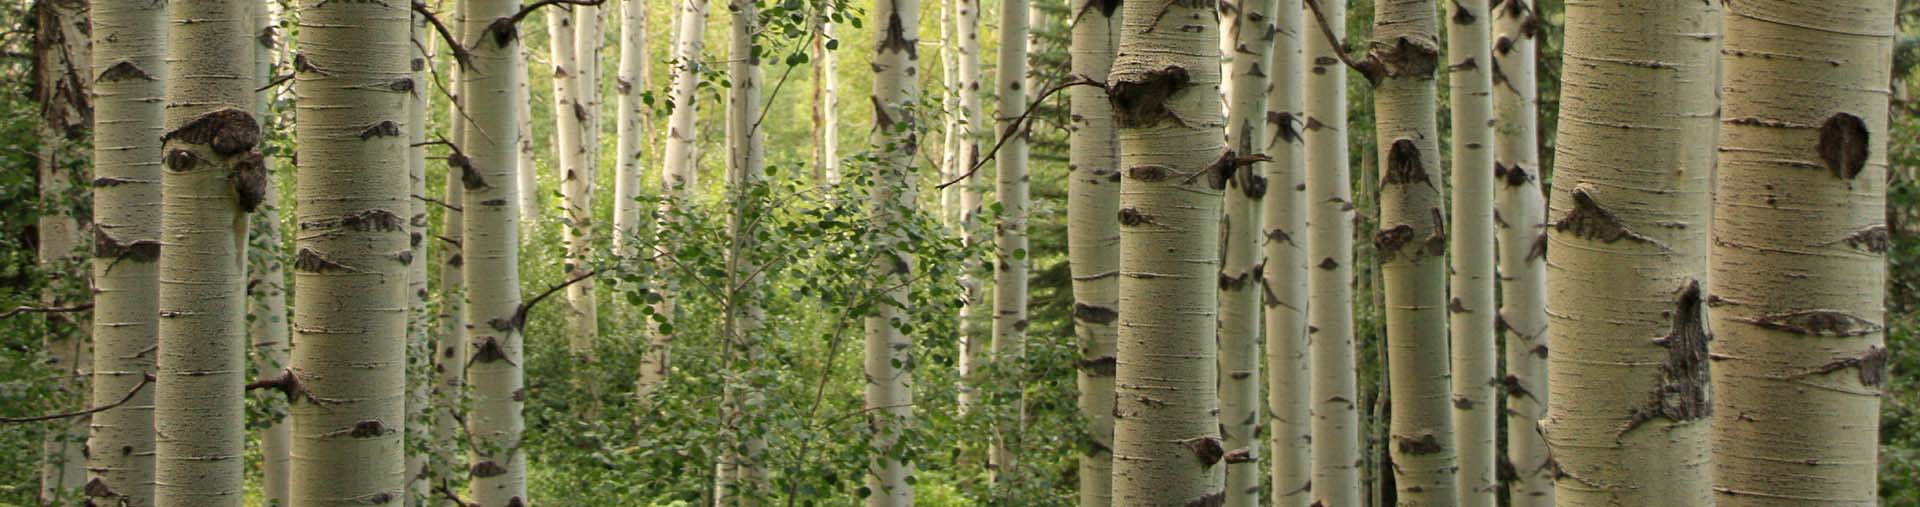 Aspen images as Confluence Sustainability Header